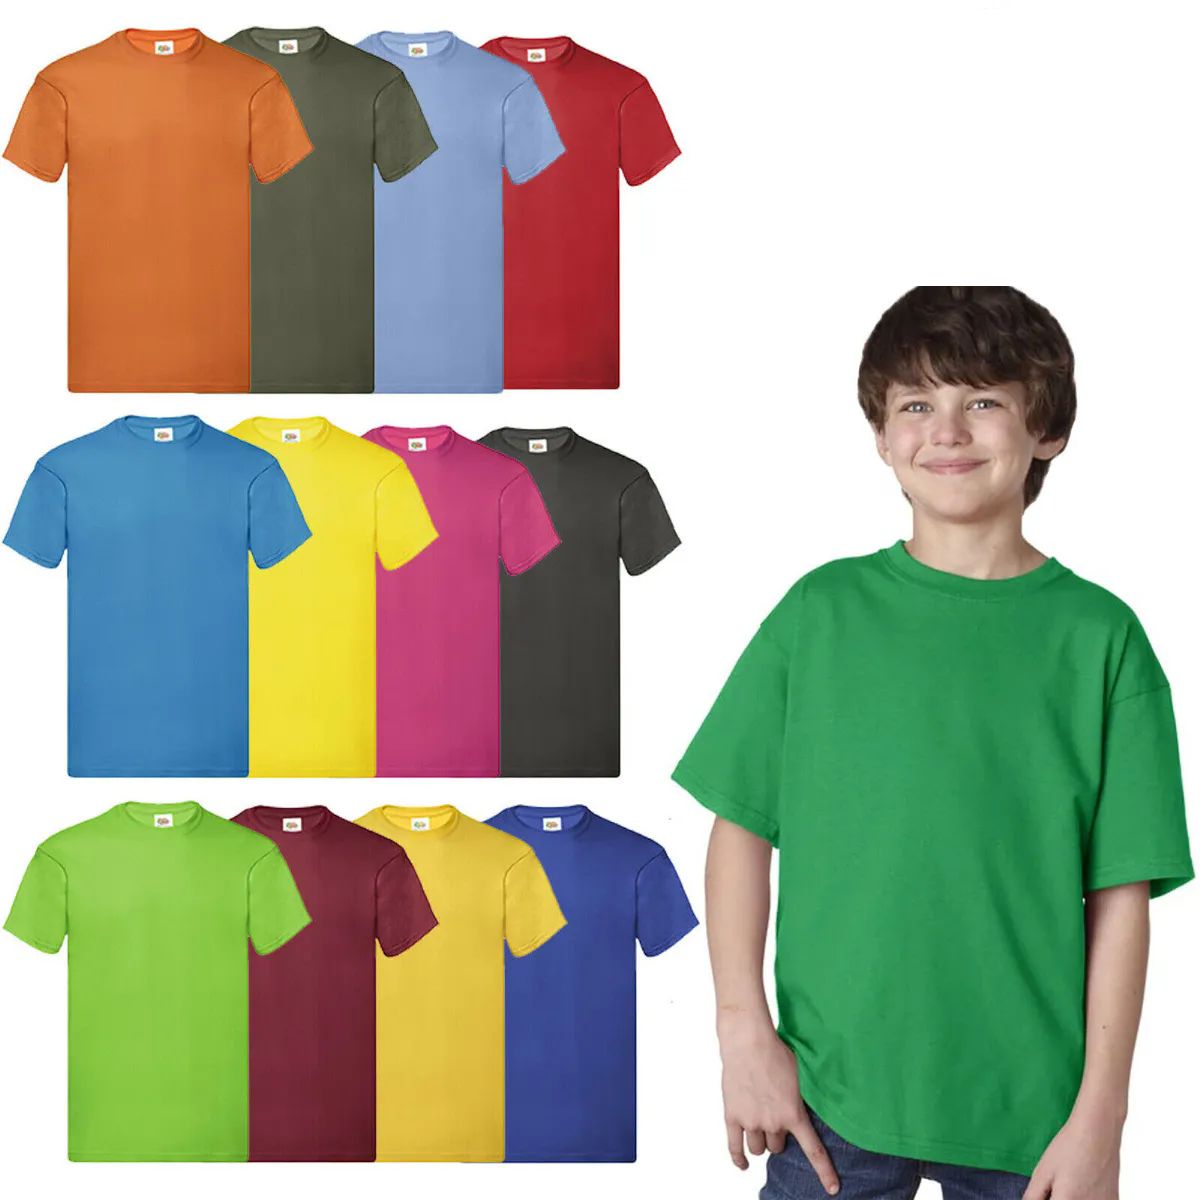 72 Pieces of Billion Hats Kids Youth Cotton Assorted Colors T Shirts Size xs